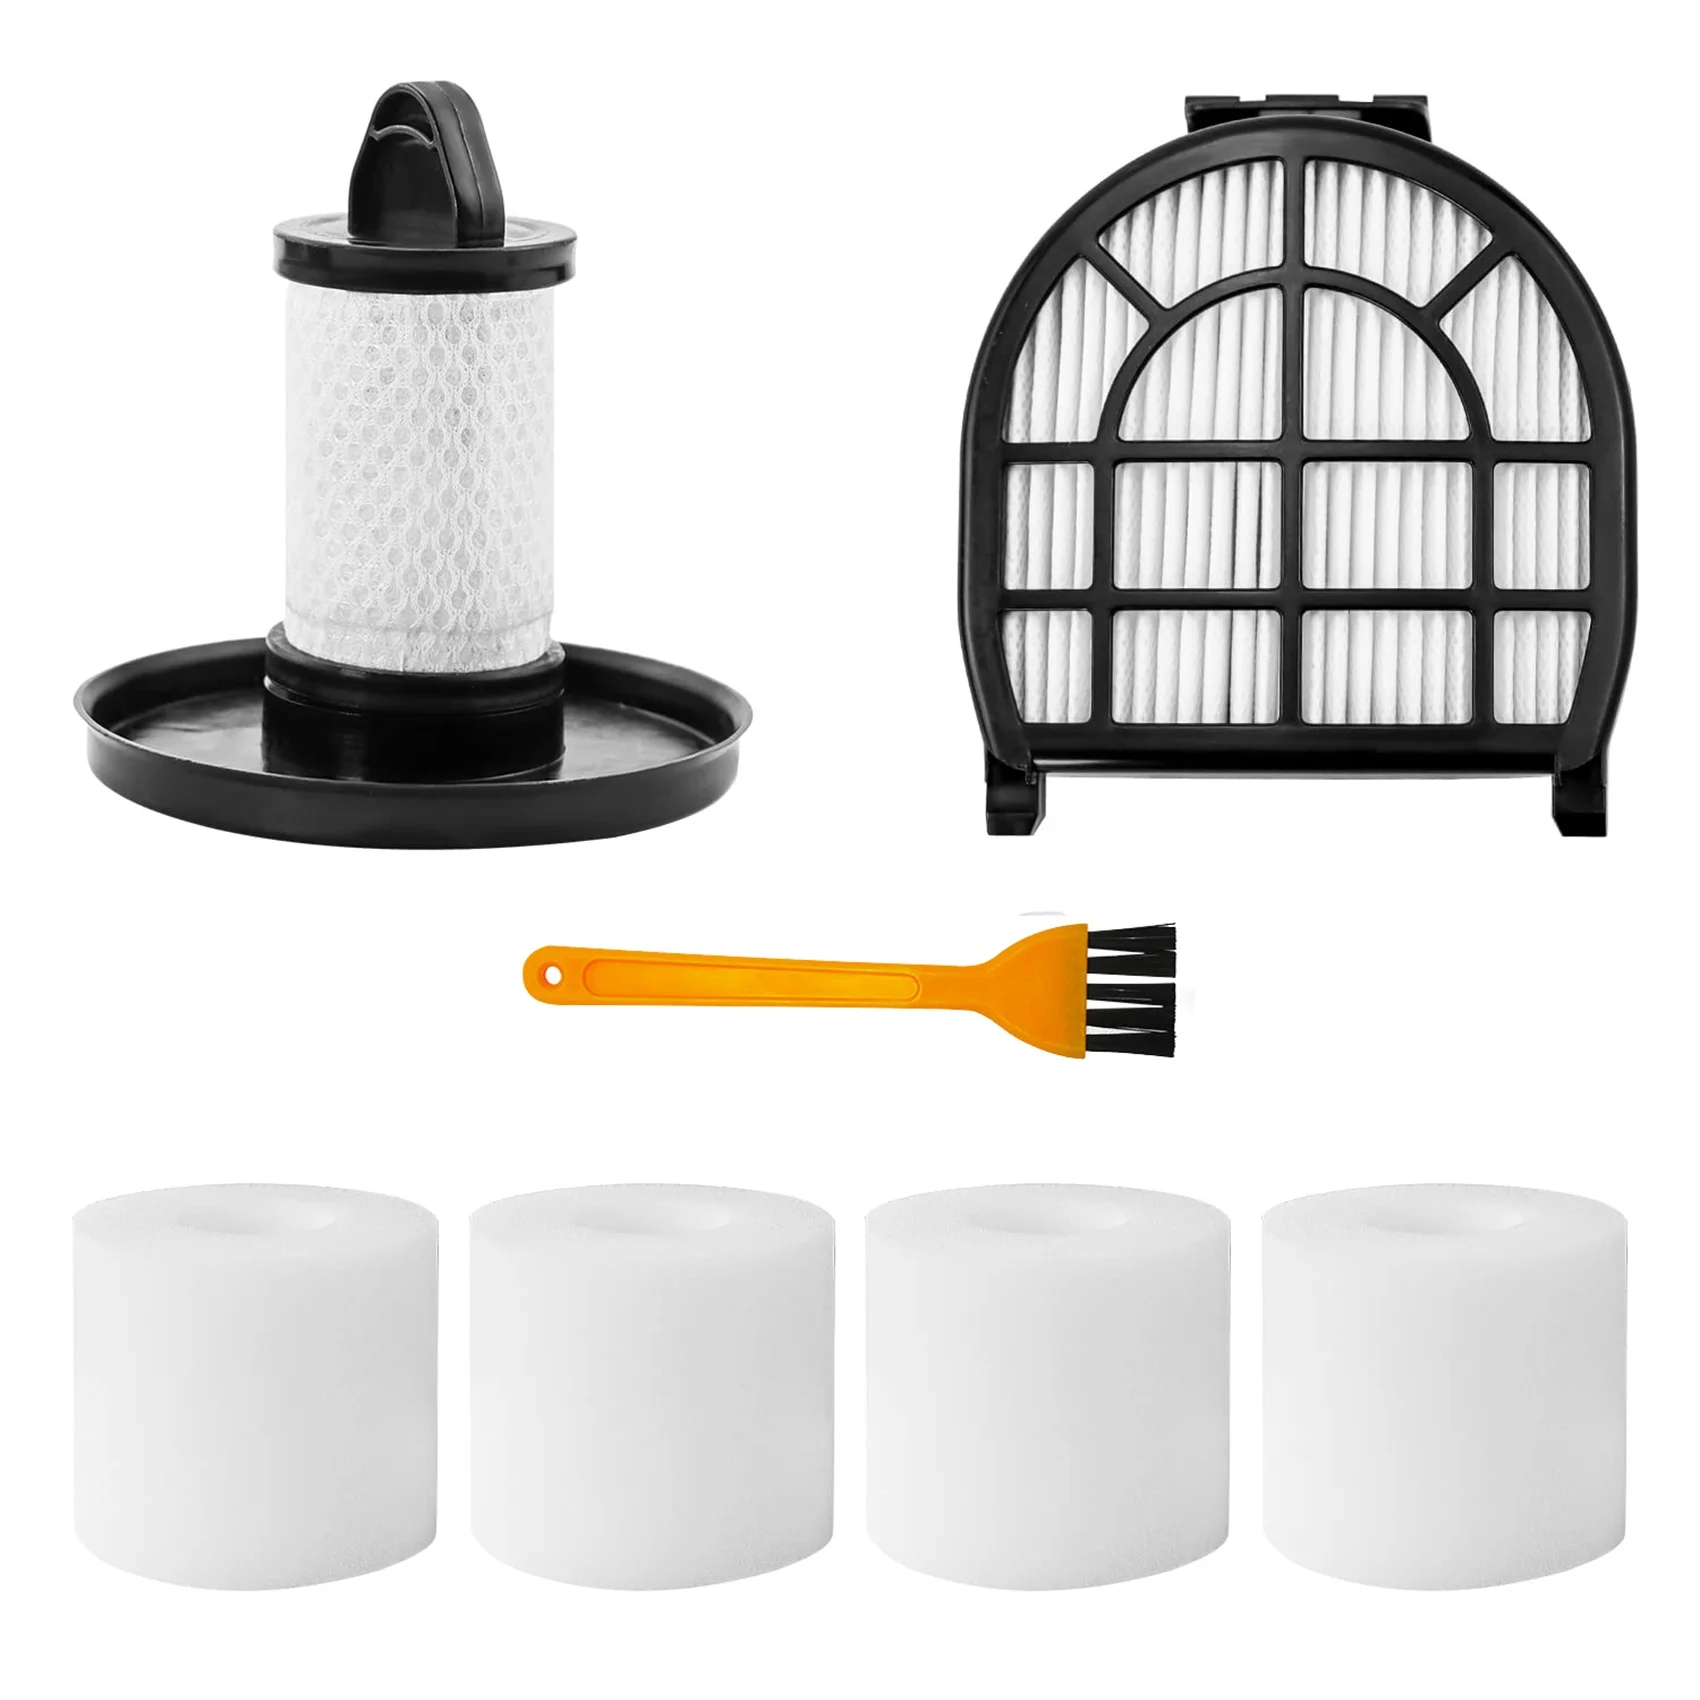 

Filter Replacements for Shark LZ600, LZ601, LZ602, LZ602C APEX UpLight Lift-Away DuoClean Vacuum Cleaner